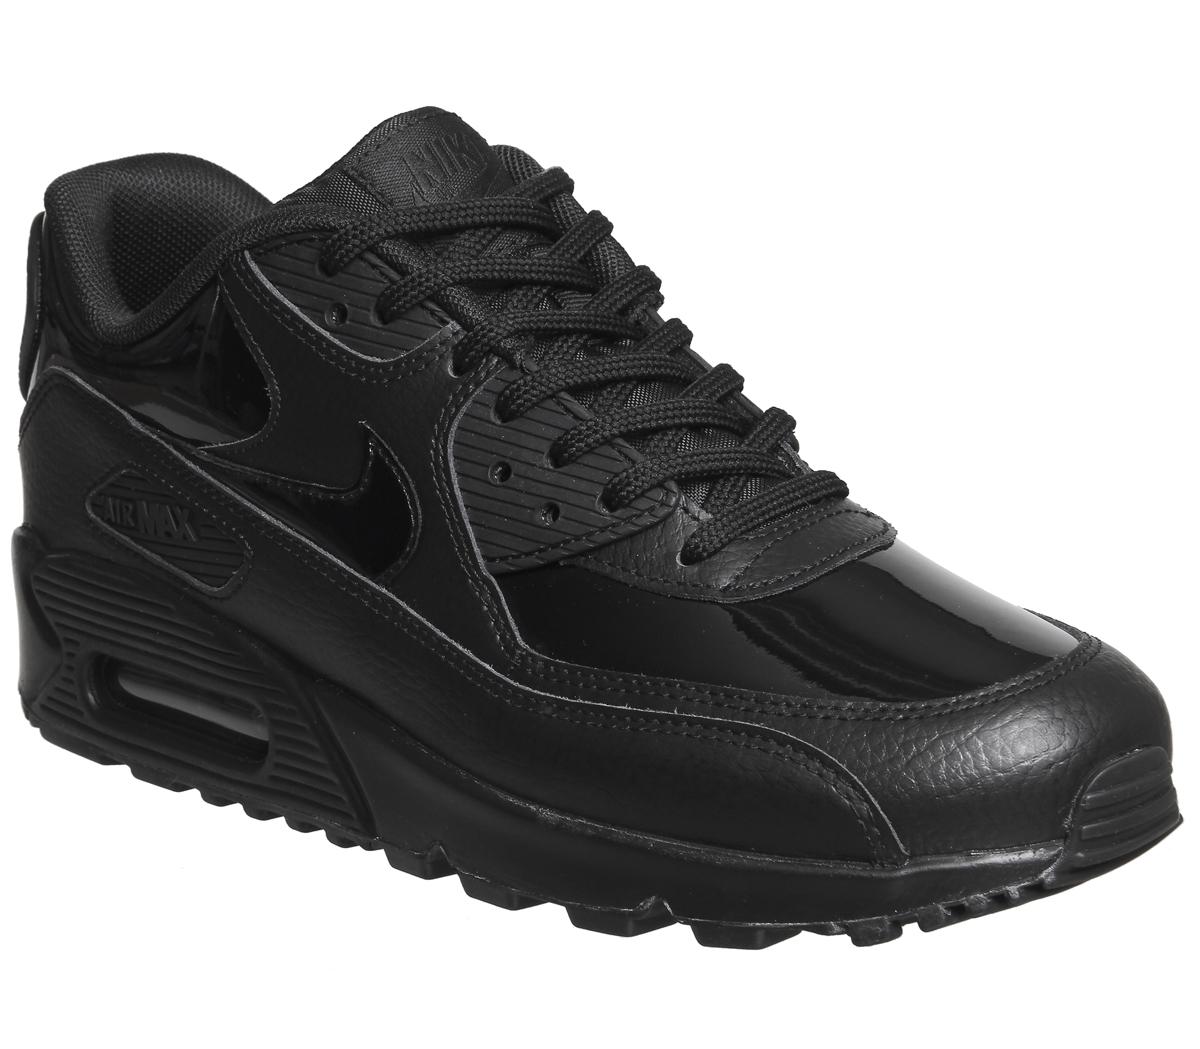 Nike Air Max 90 Trainers Black Patent - Unisex Sports